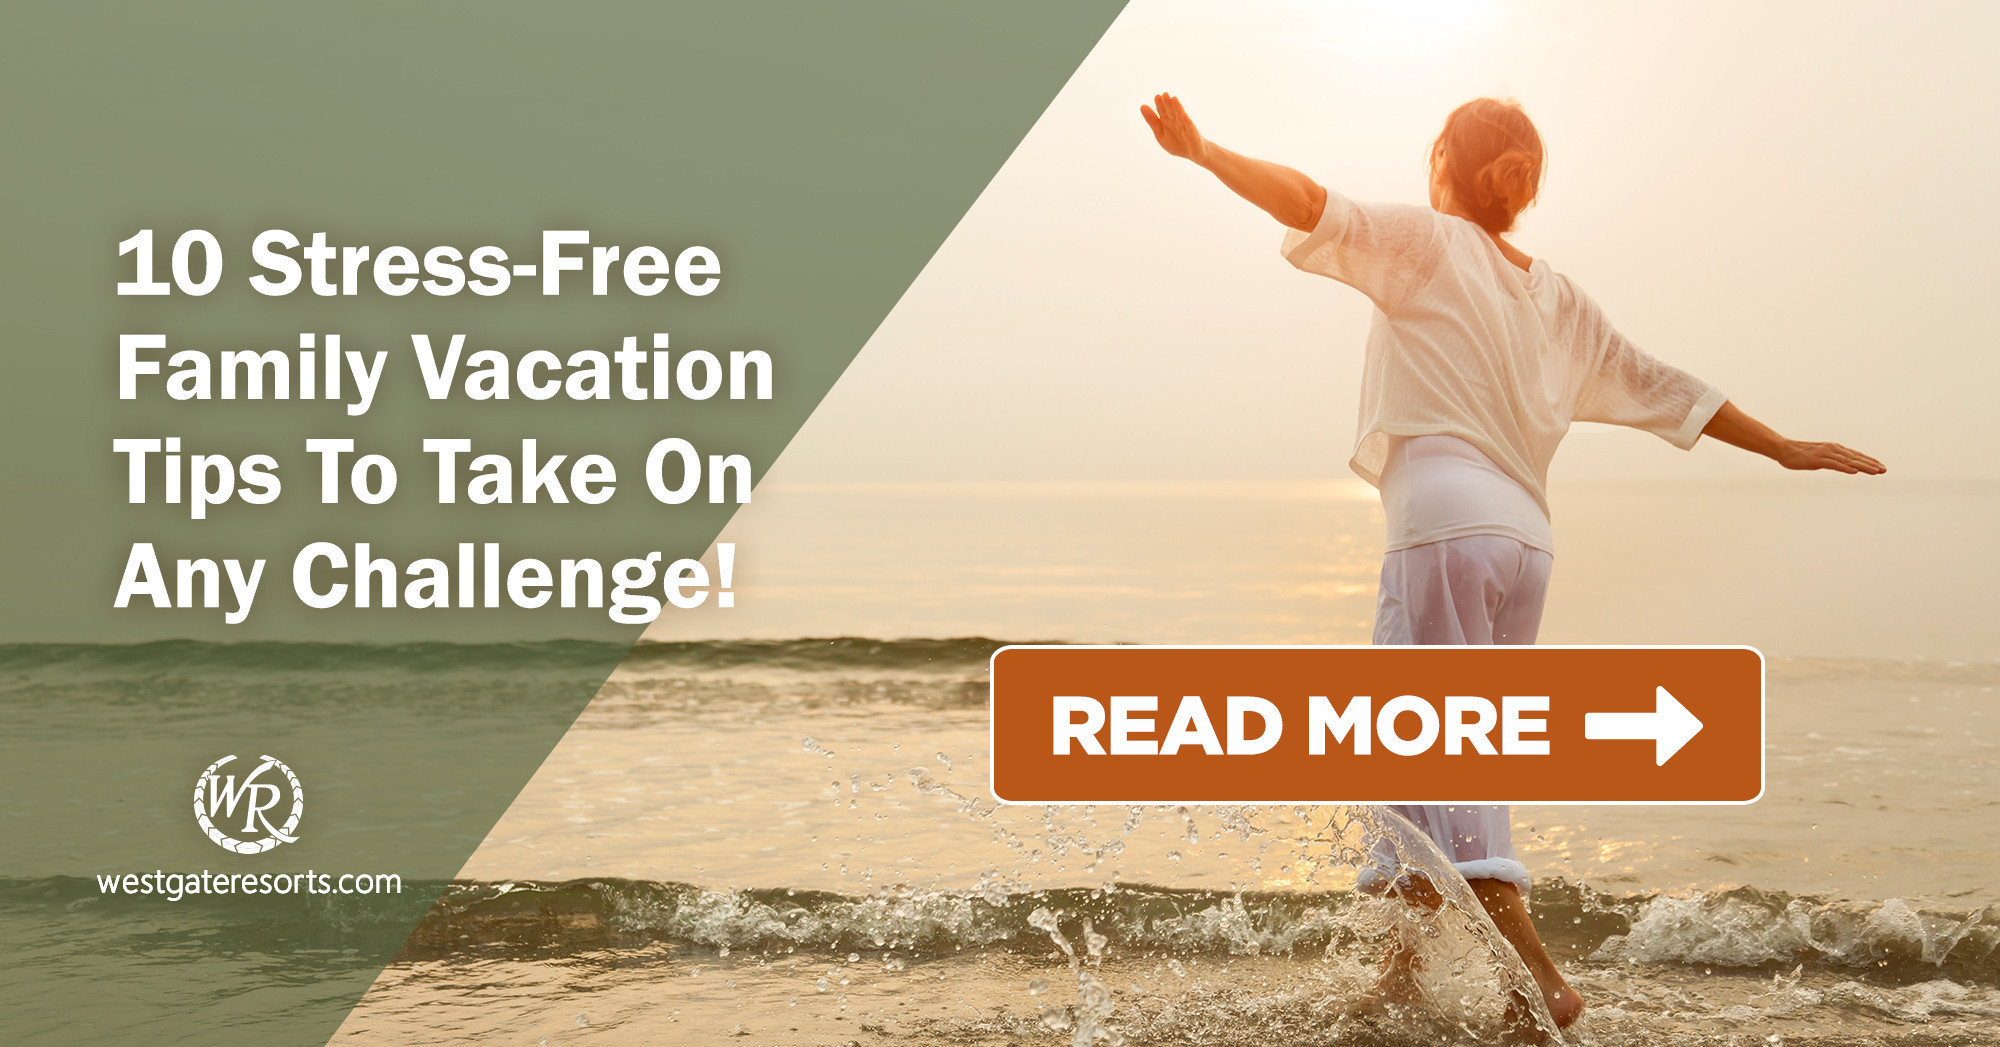 10 Stress-Free Family Vacation Tips To Take On Any Challenge! | Stress Free Family Vacations